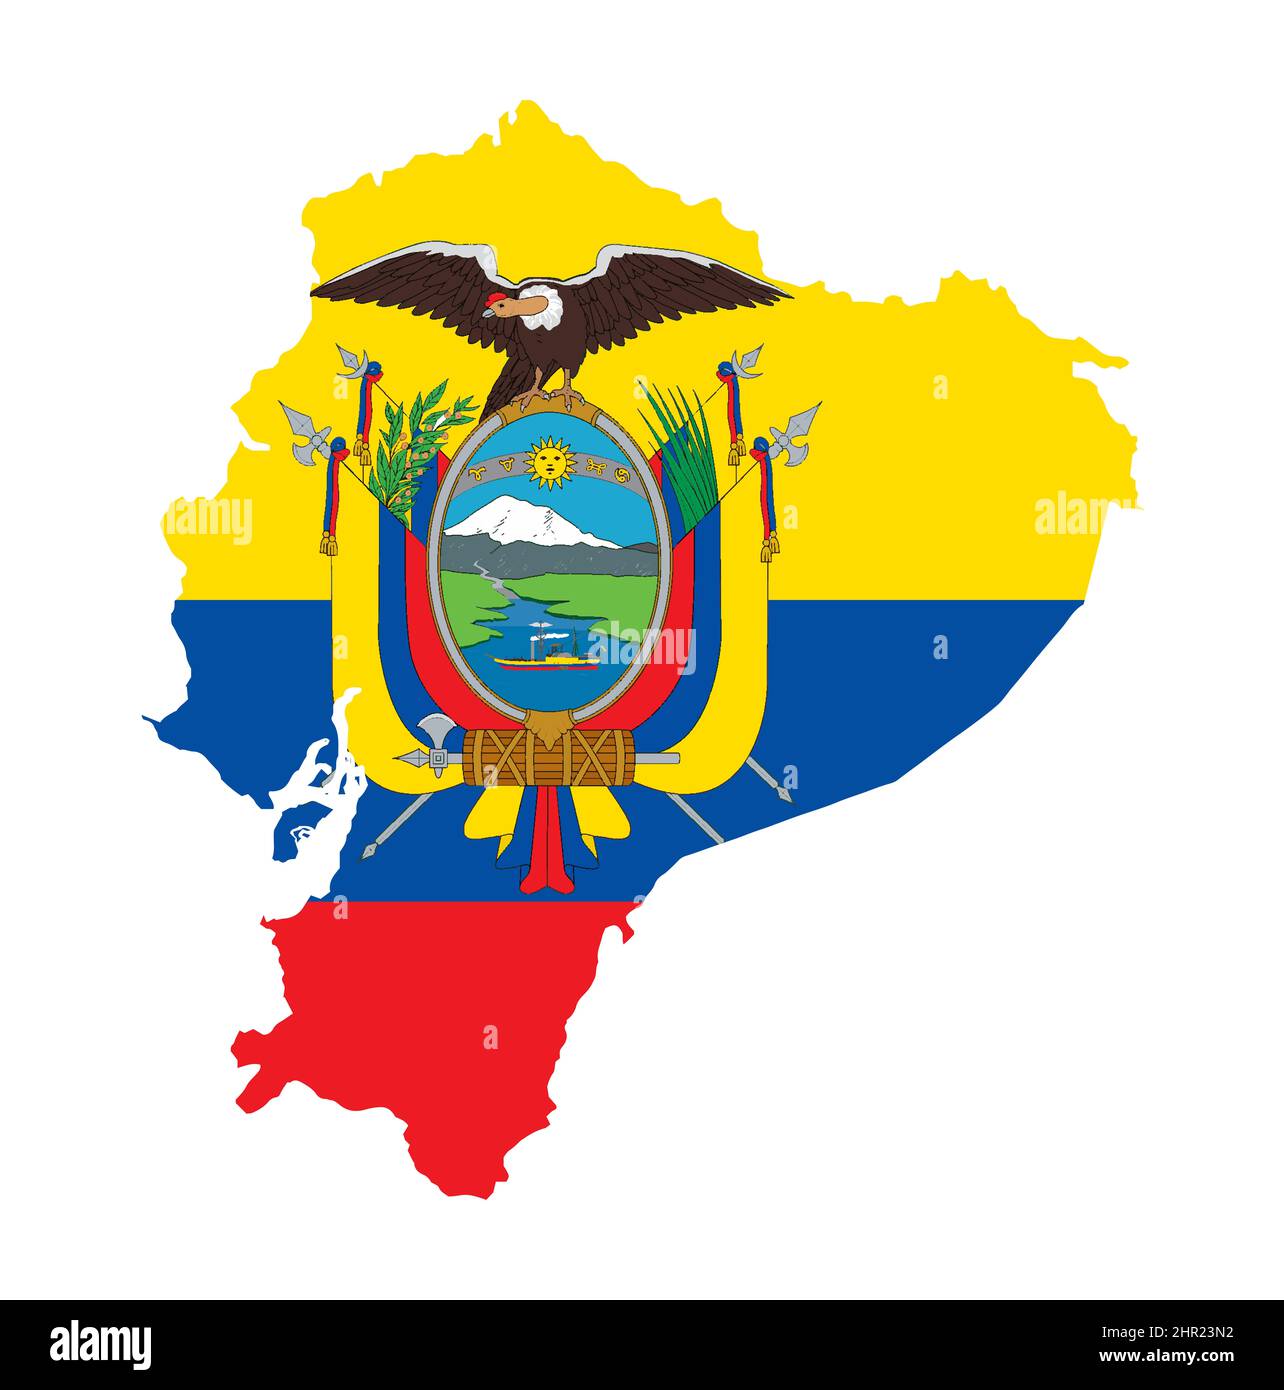 Outline silhouette map of the South American country of Ecuador set over the national flag all isolated on a white background Stock Photo